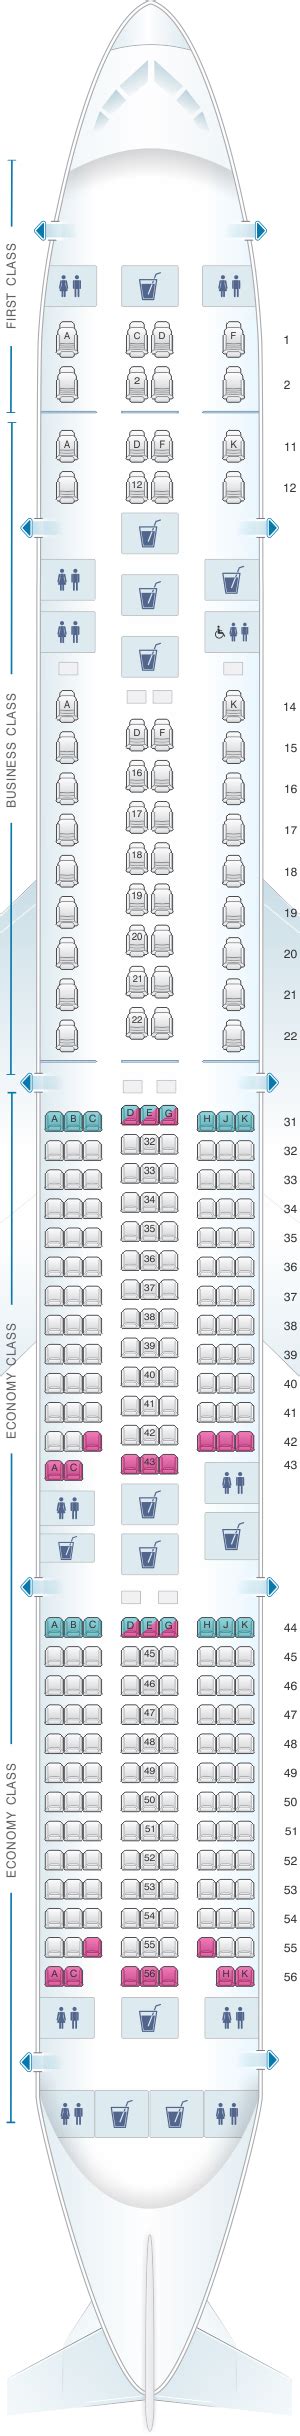 Seat Map Singapore Airlines Boeing B777 300er Three Class Singapore